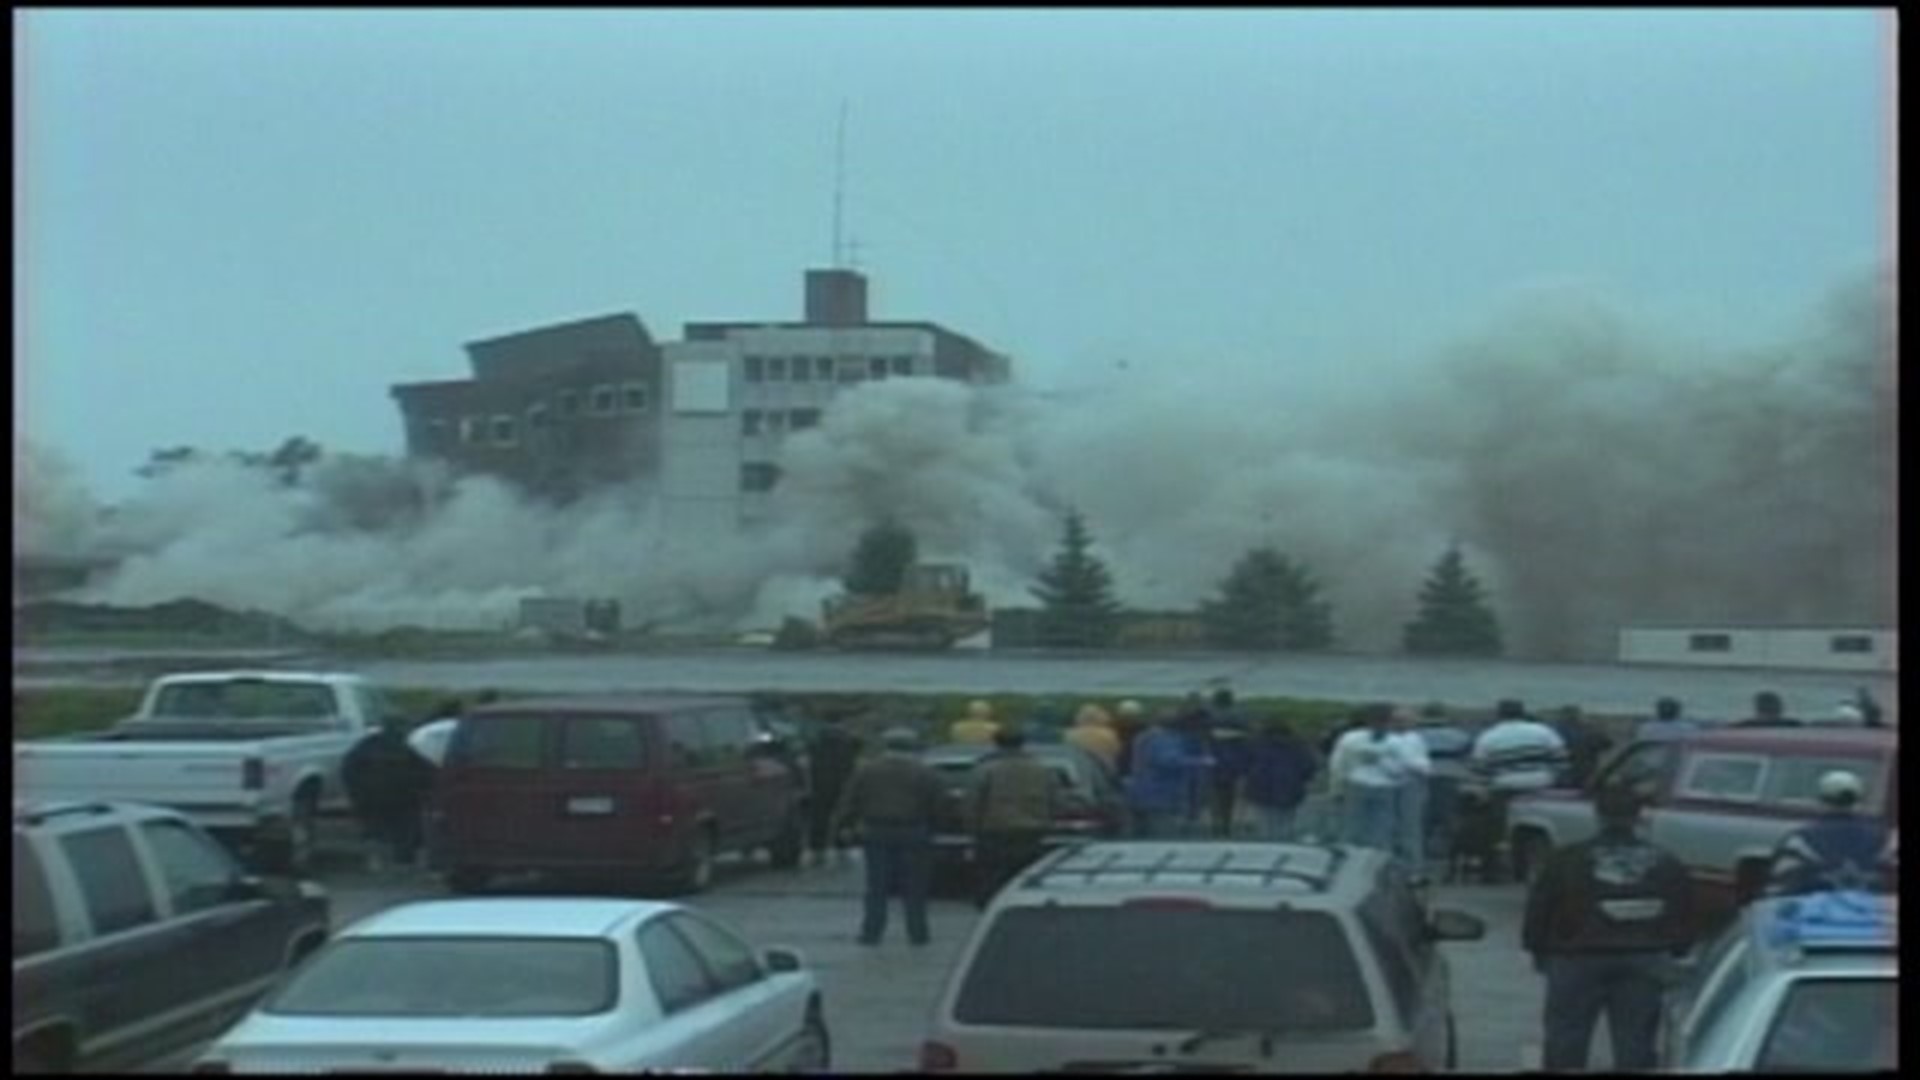 TBT: Moline Lutheran Hospital Implosion from November 1998